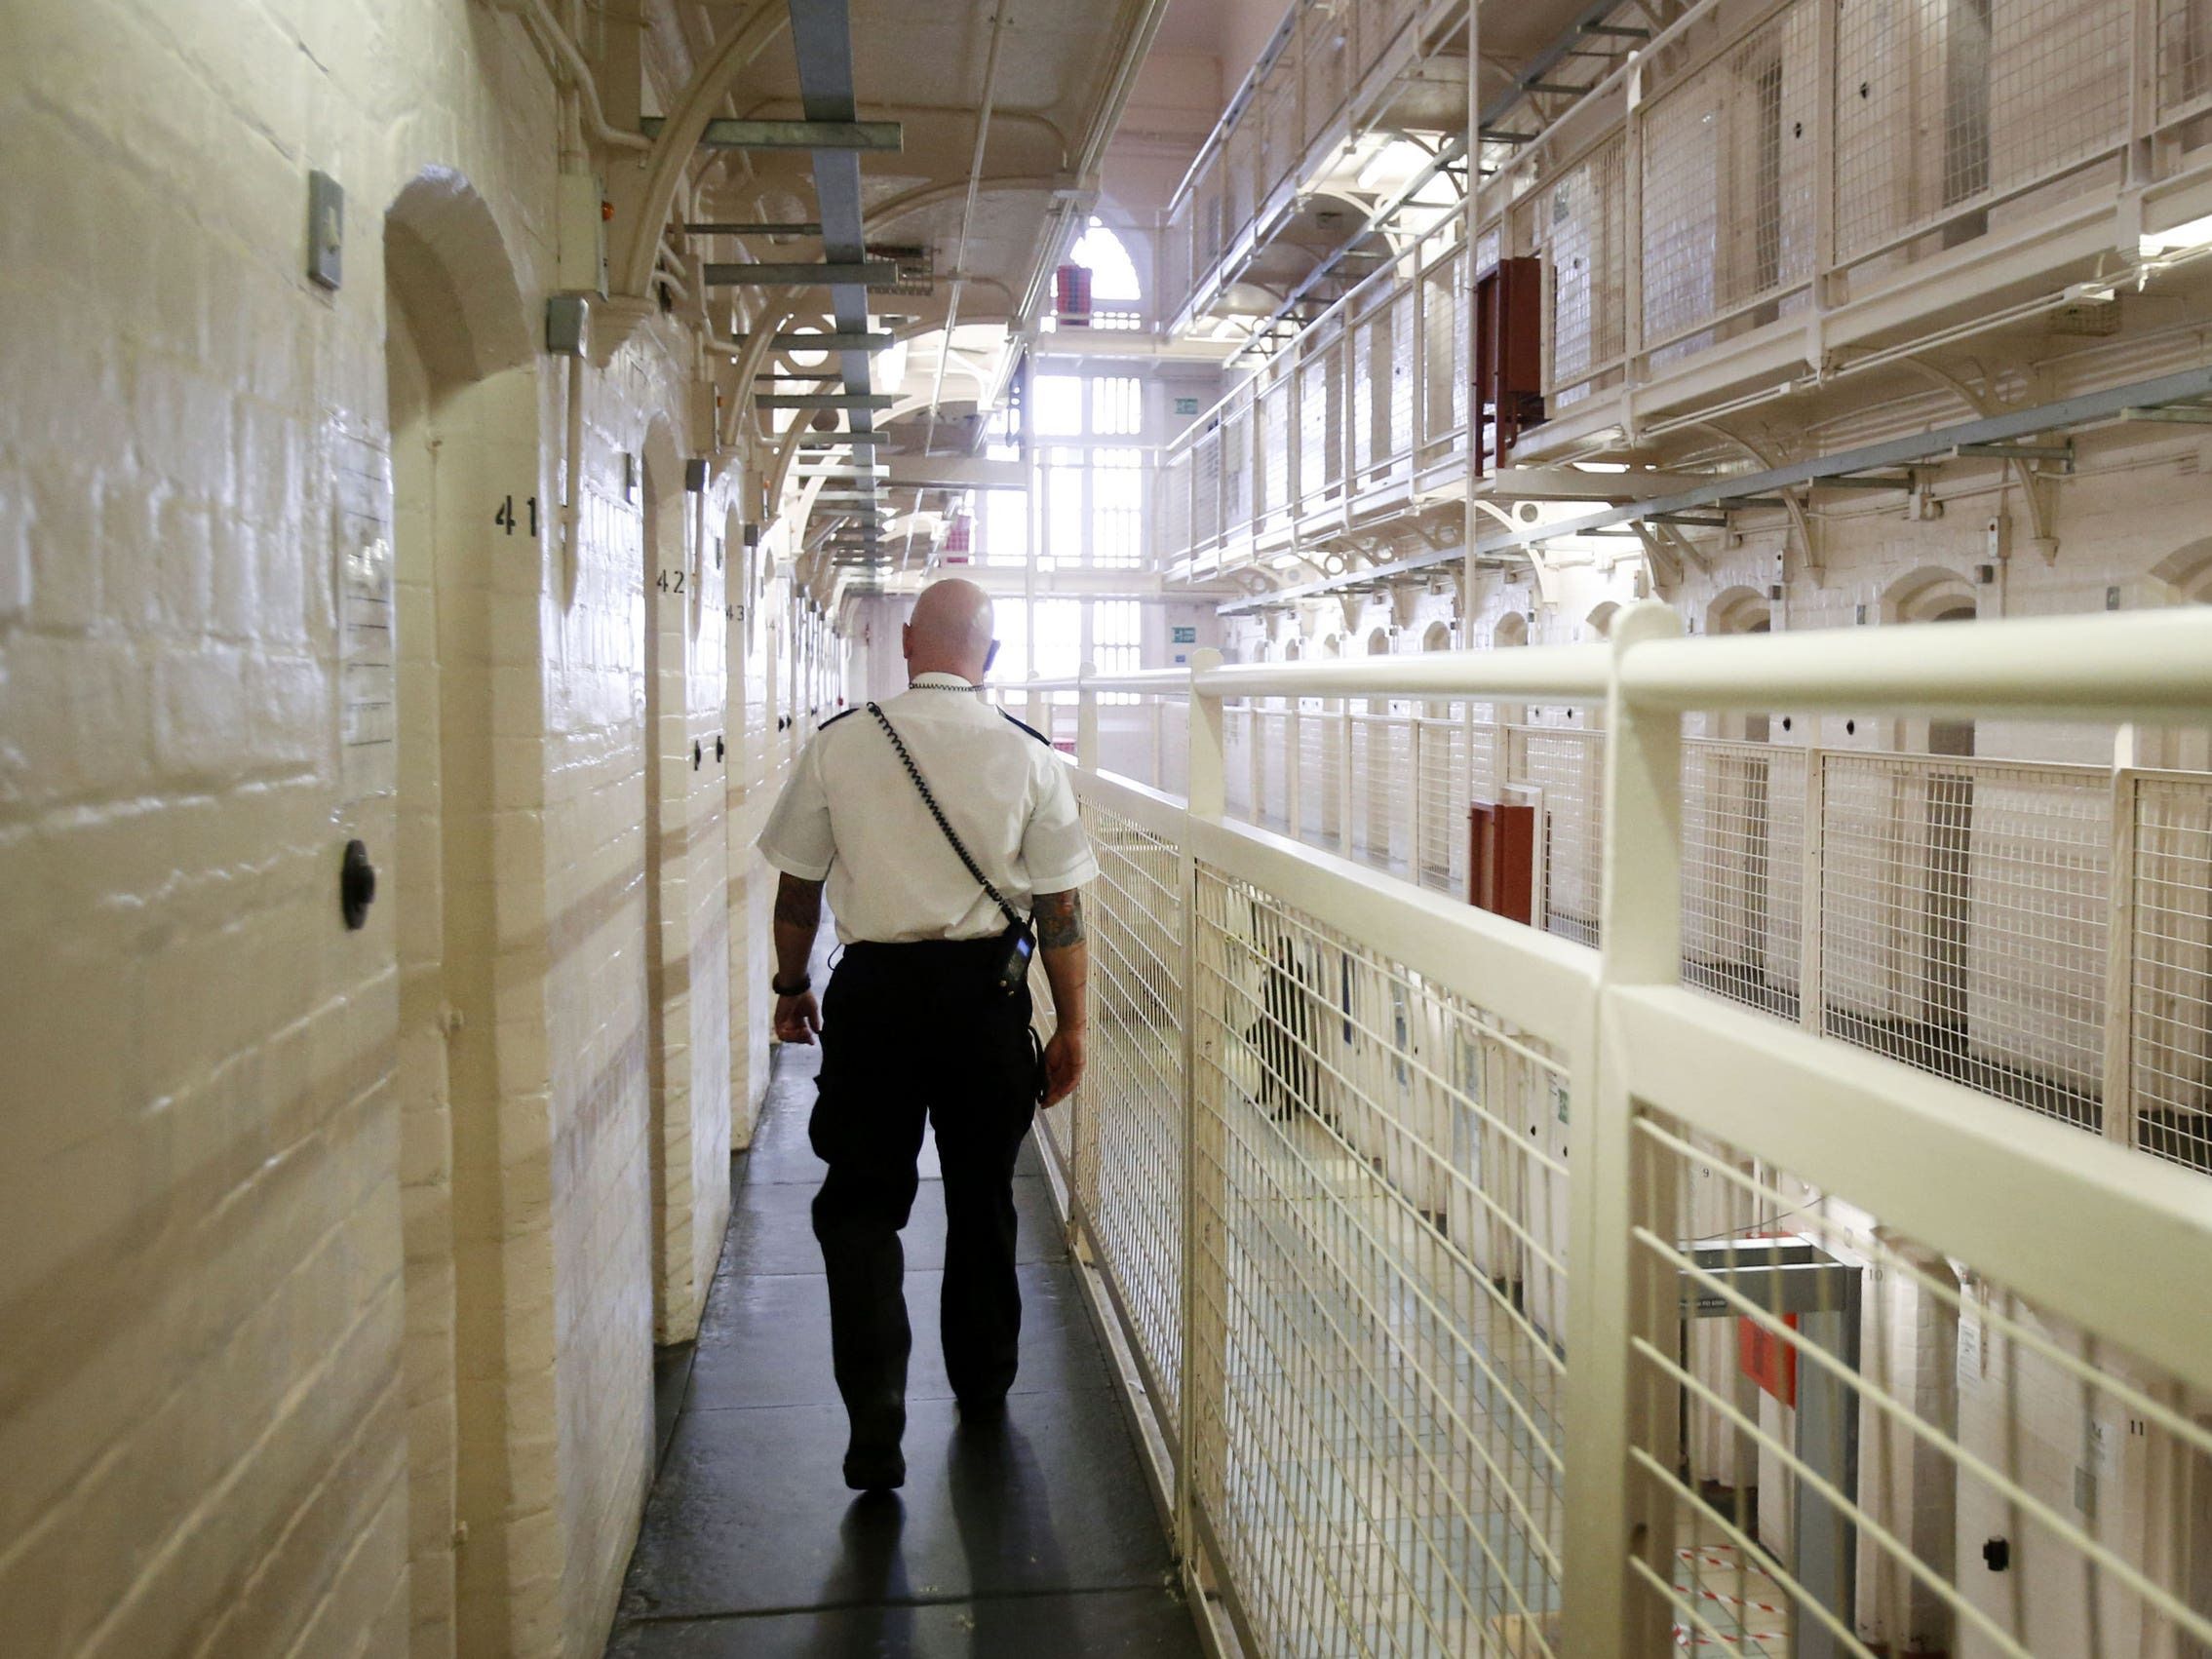 Offenders to be released early as prison system faces ‘collapse’, says minister